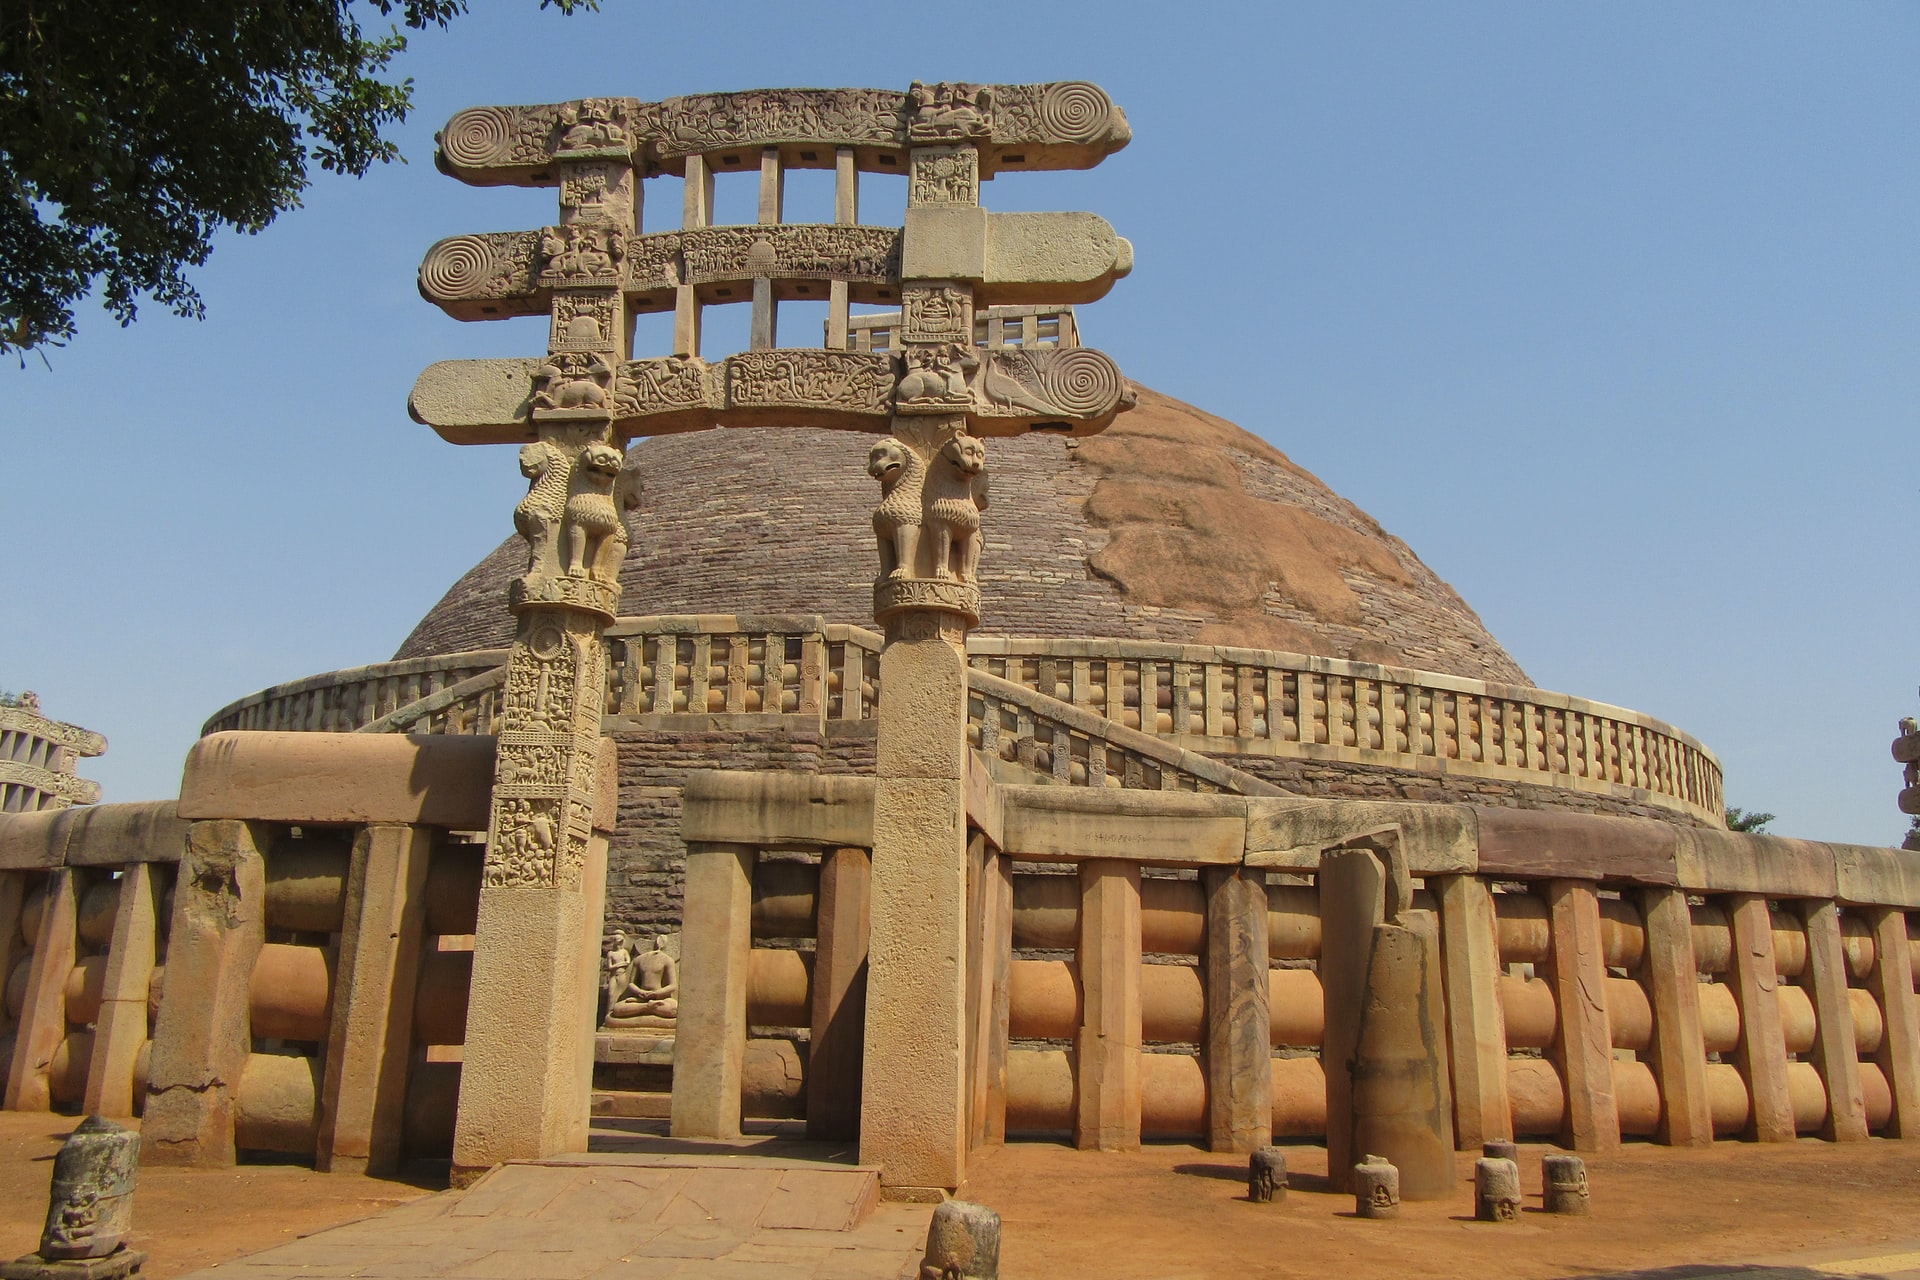 The Great Stupa at Sanchi was built by Emperor Ashoka to honor Lord Buddha. It is one of the nicely persevered stupas with its ornamental gateways. This Stupa at Sanchi stands with pride as an icon of Sanchi. It is also one of the oldest stone structures in India attracting thousands of Pilgrimage and travelers to the destination.